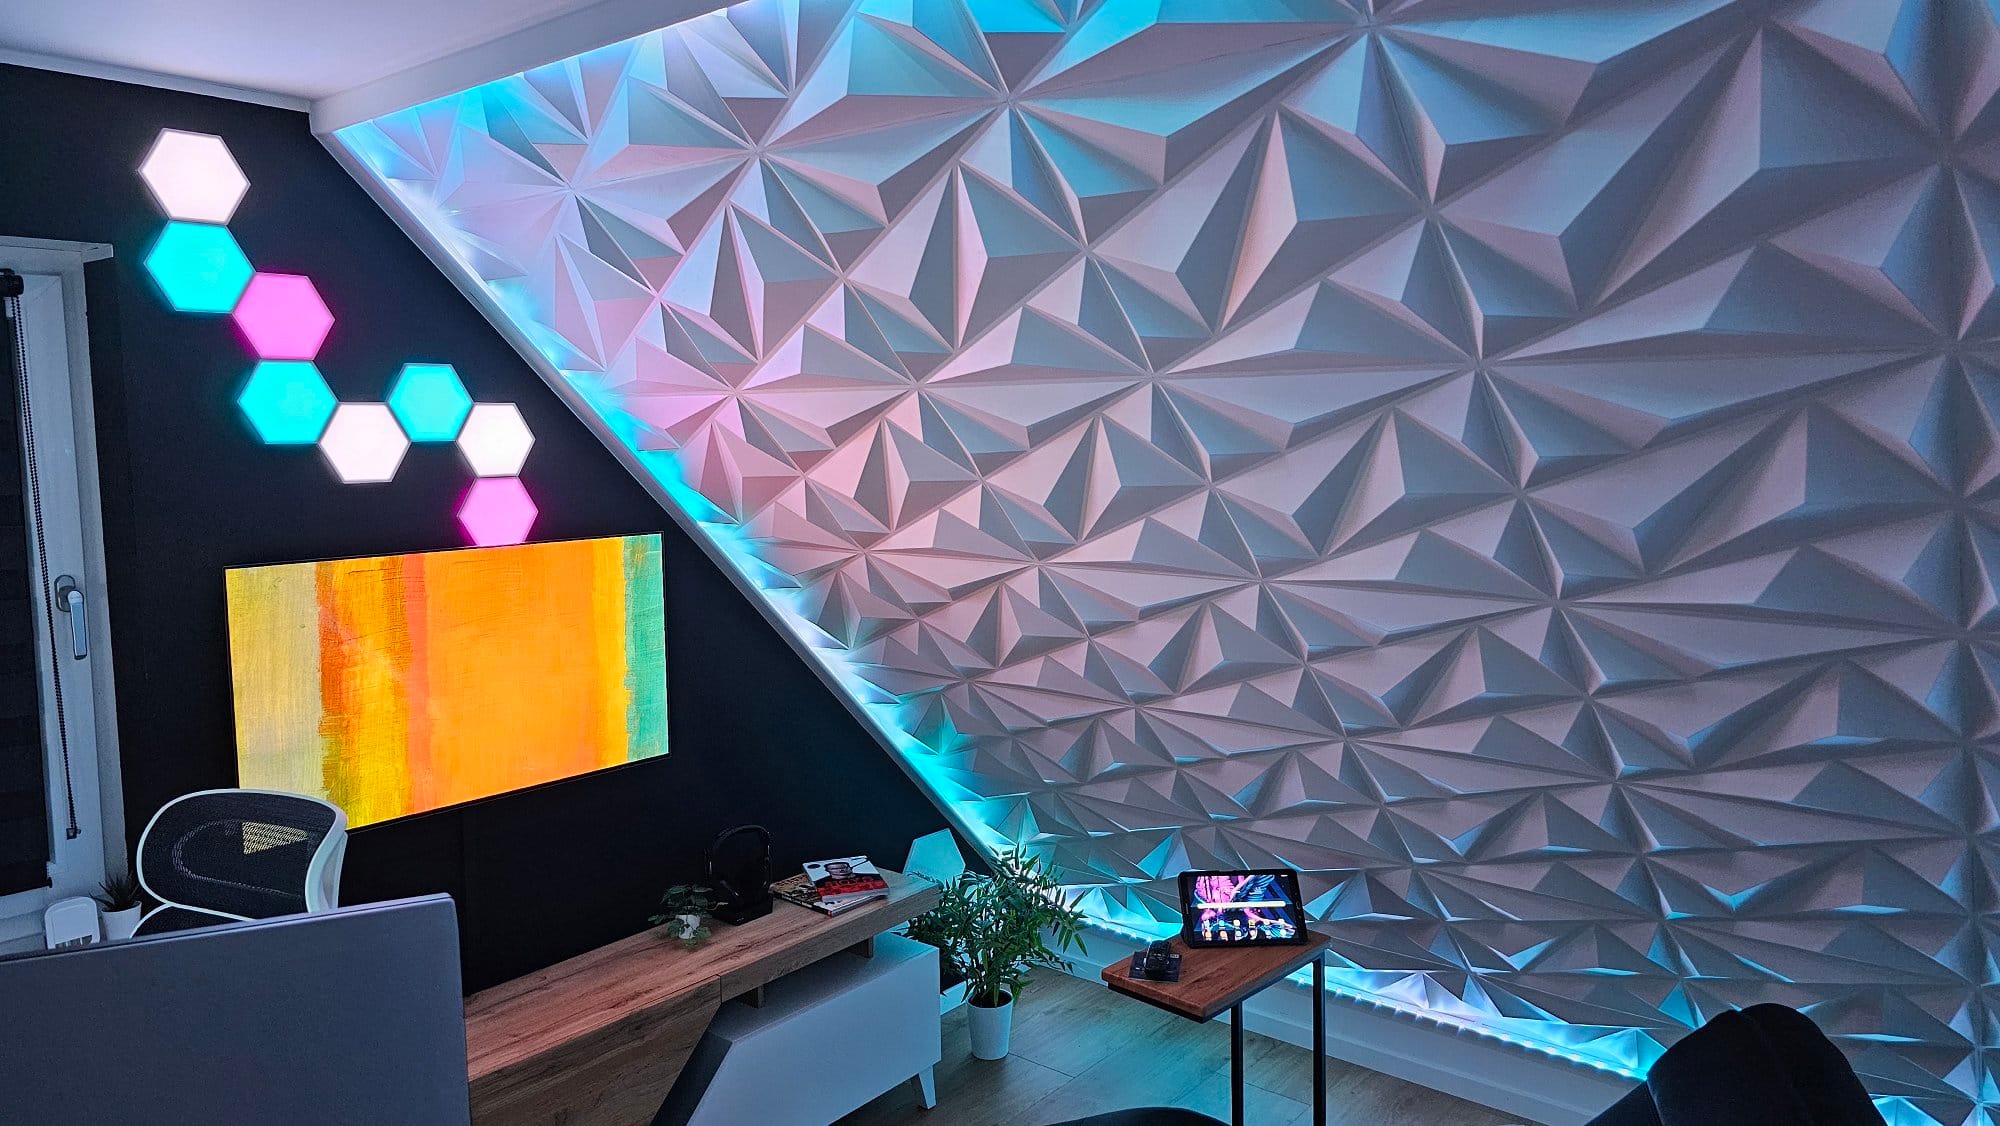 A modern home office corner with a geometric 3D wall art installation, illuminated by ambient lighting, a mounted abstract painting, and a tablet on a side table, creating a vibrant and artistic workspace atmosphere